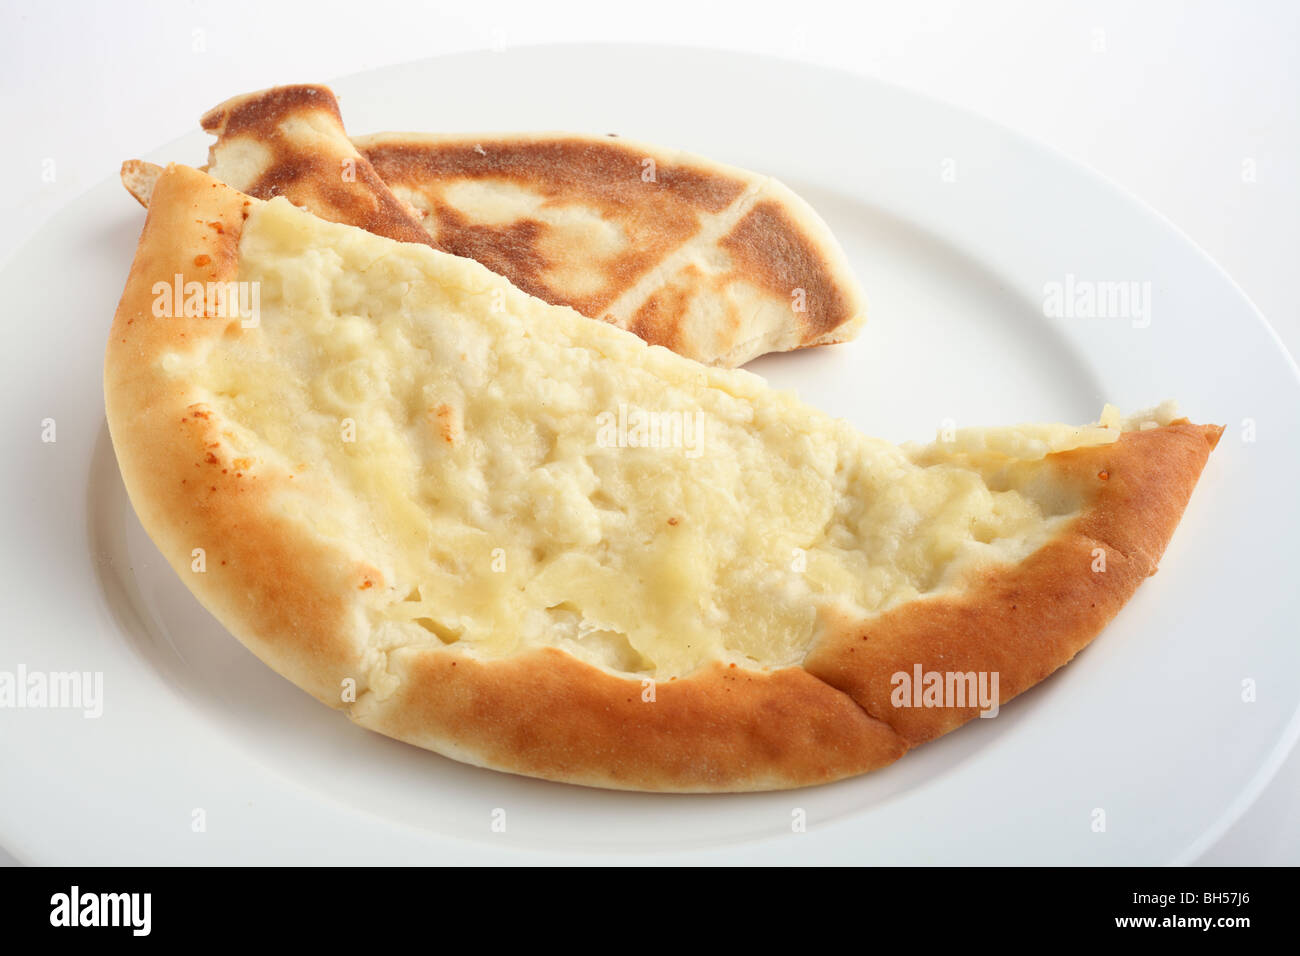 A fataya bread with halloumi cheese topping - Arabia's answer to the pizze - on a white plate. Stock Photo